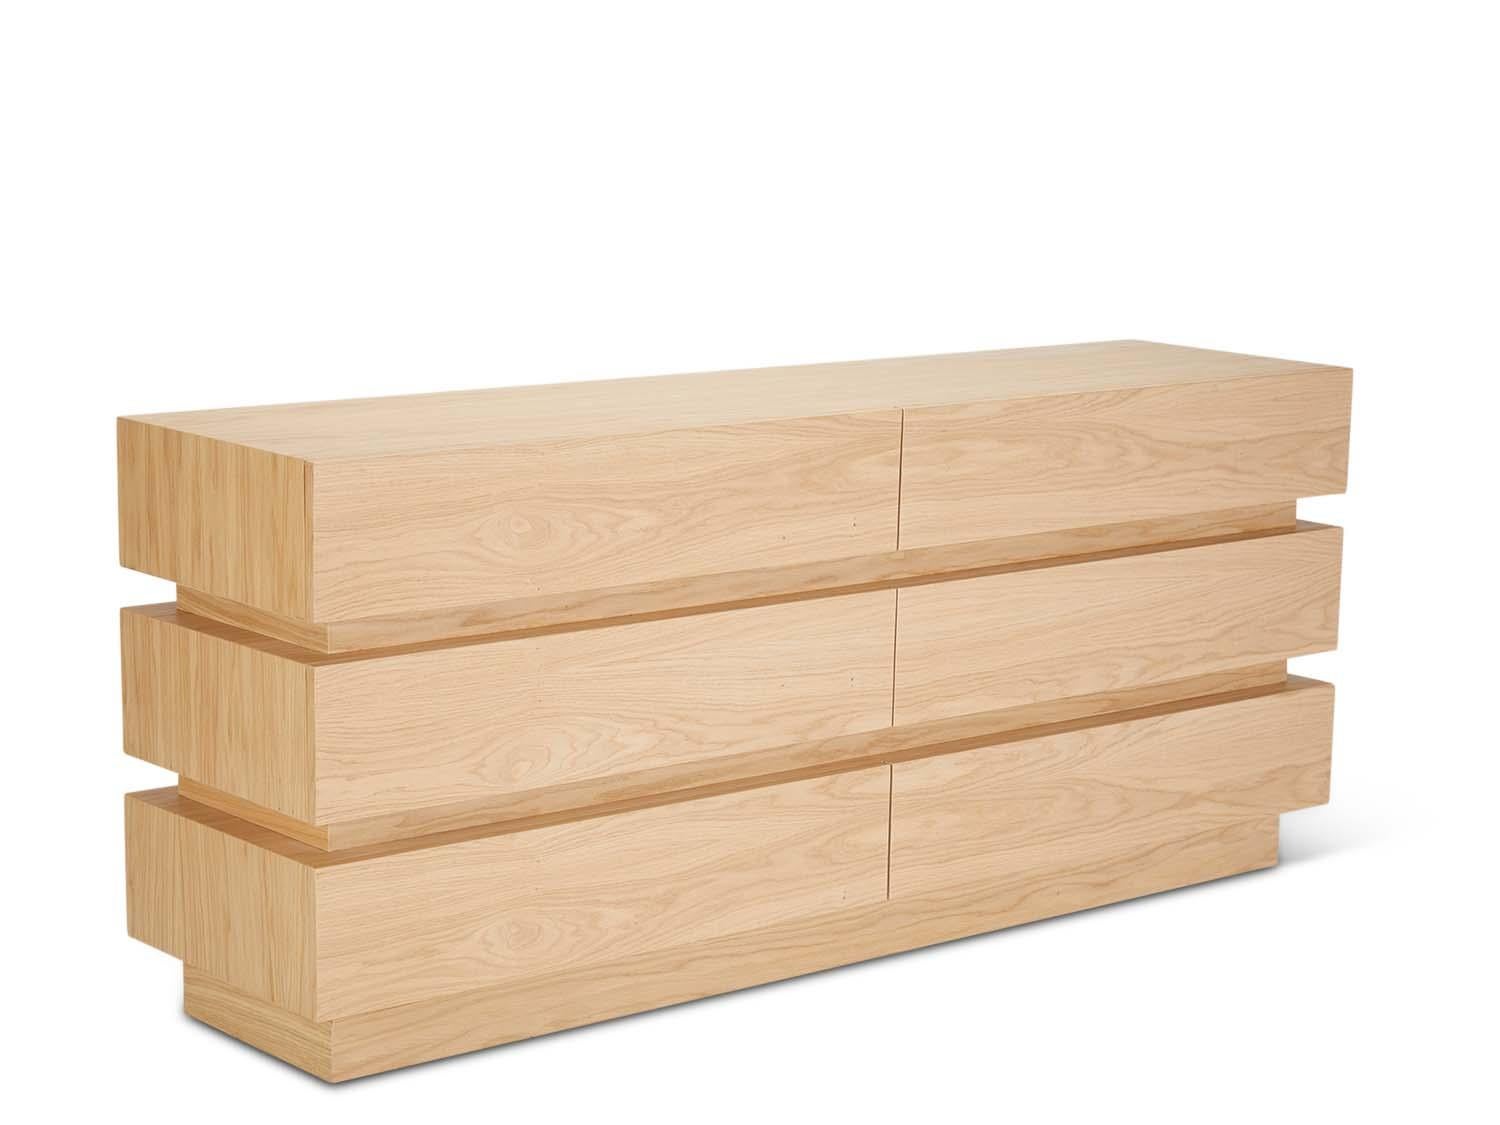 The stacked box dresser features six drawers and is made in American walnut or white oak.

The Lawson-Fenning Collection is designed and handmade in Los Angeles, California. Reach out to discover what options are currently in stock.